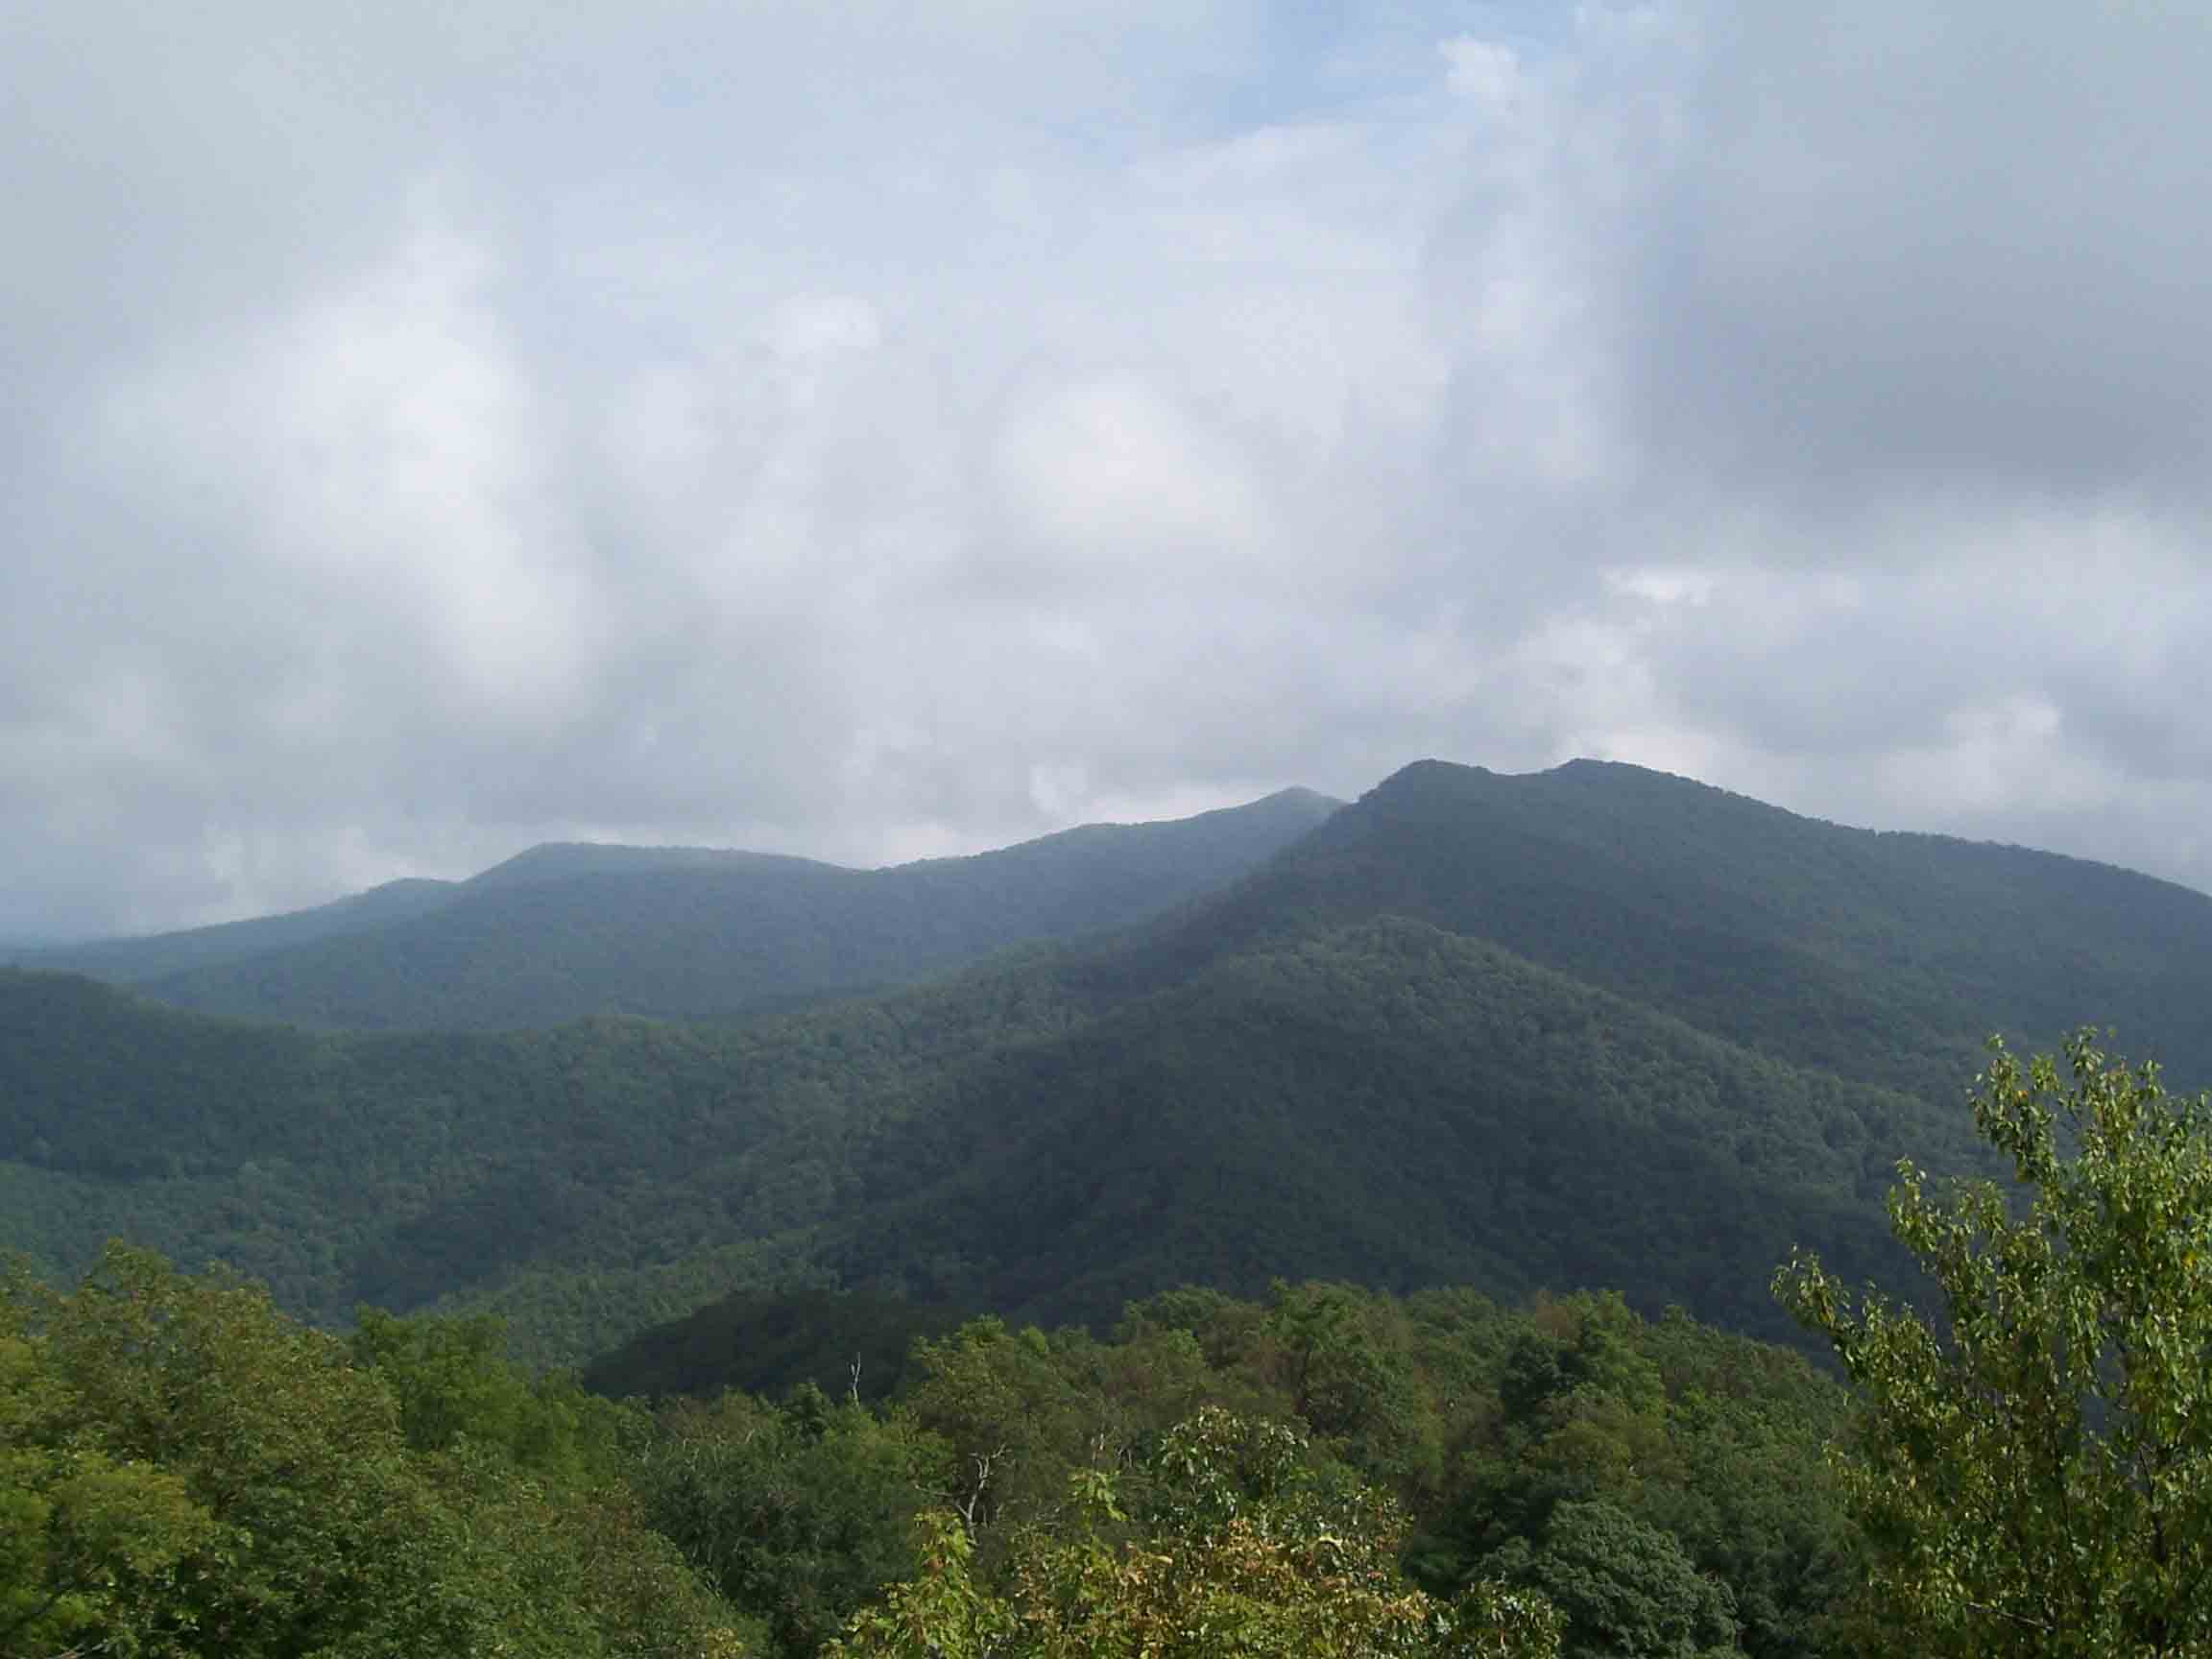 mm 6.5 - Taken from Wesser Bald, this pic shows Rocky Bald ascending out of Tellico Gap, Black Bald, Copper Ridge Bald with Wayah Bald in the Left background. Courtesy willey54@yahoo.com